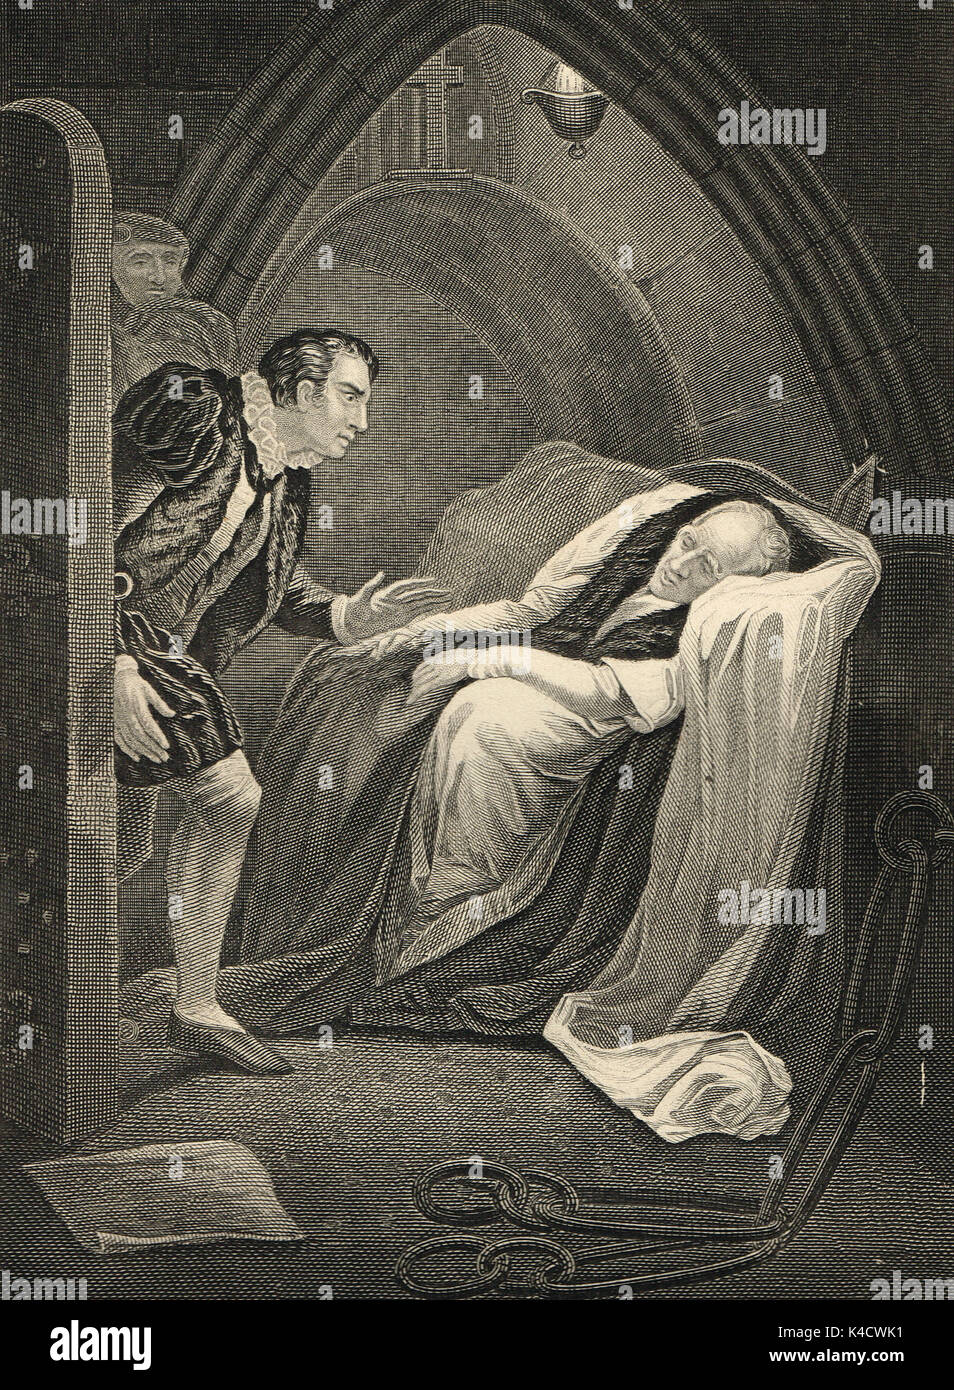 The death of Mortimer.  Act II Scene 5 in Henry VI Part I by William Shakespeare. Stock Photo